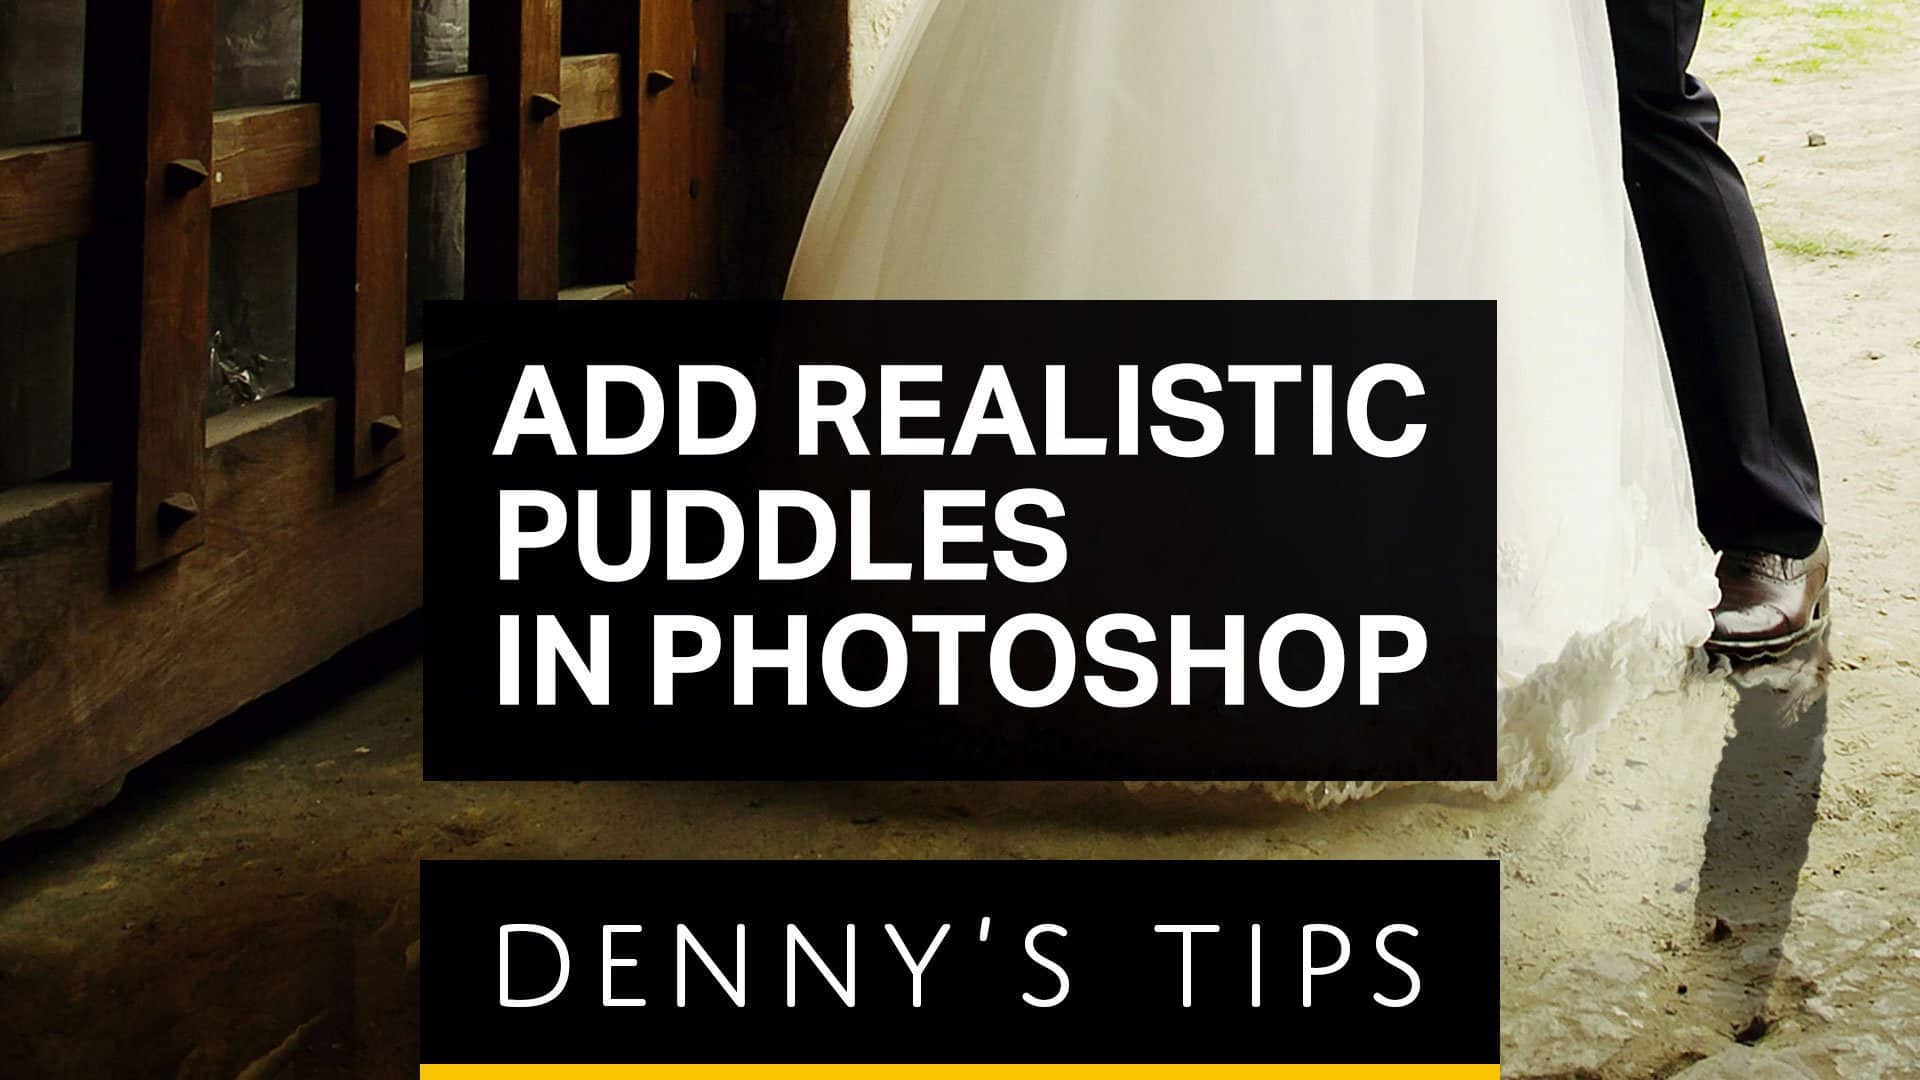 How to Add Photorealistic Puddles in Photoshop